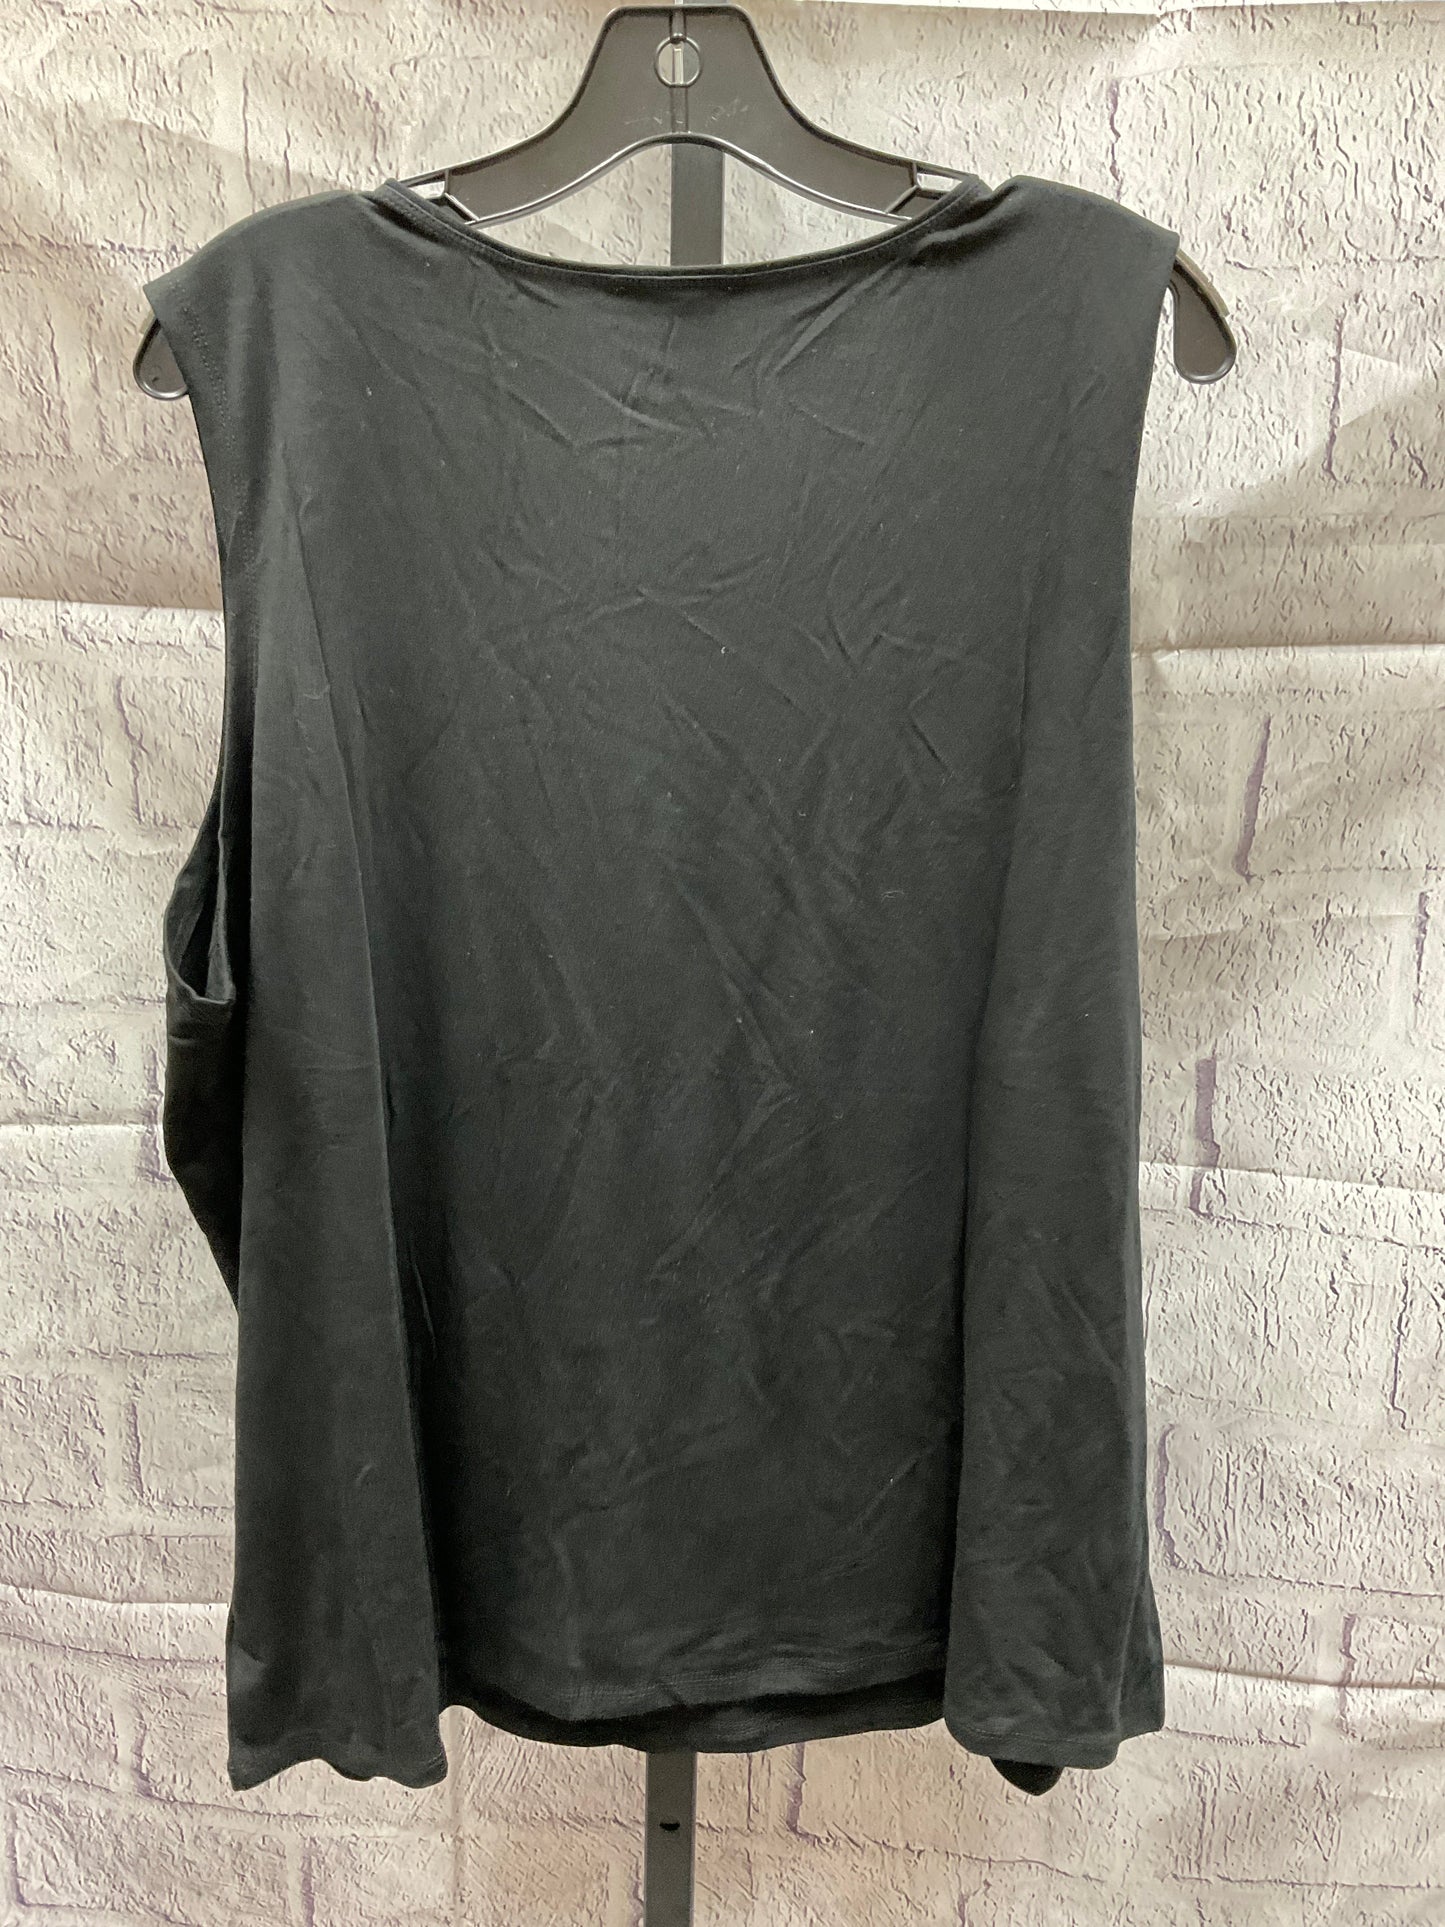 Top Sleeveless By Susan Graver  Size: 2x